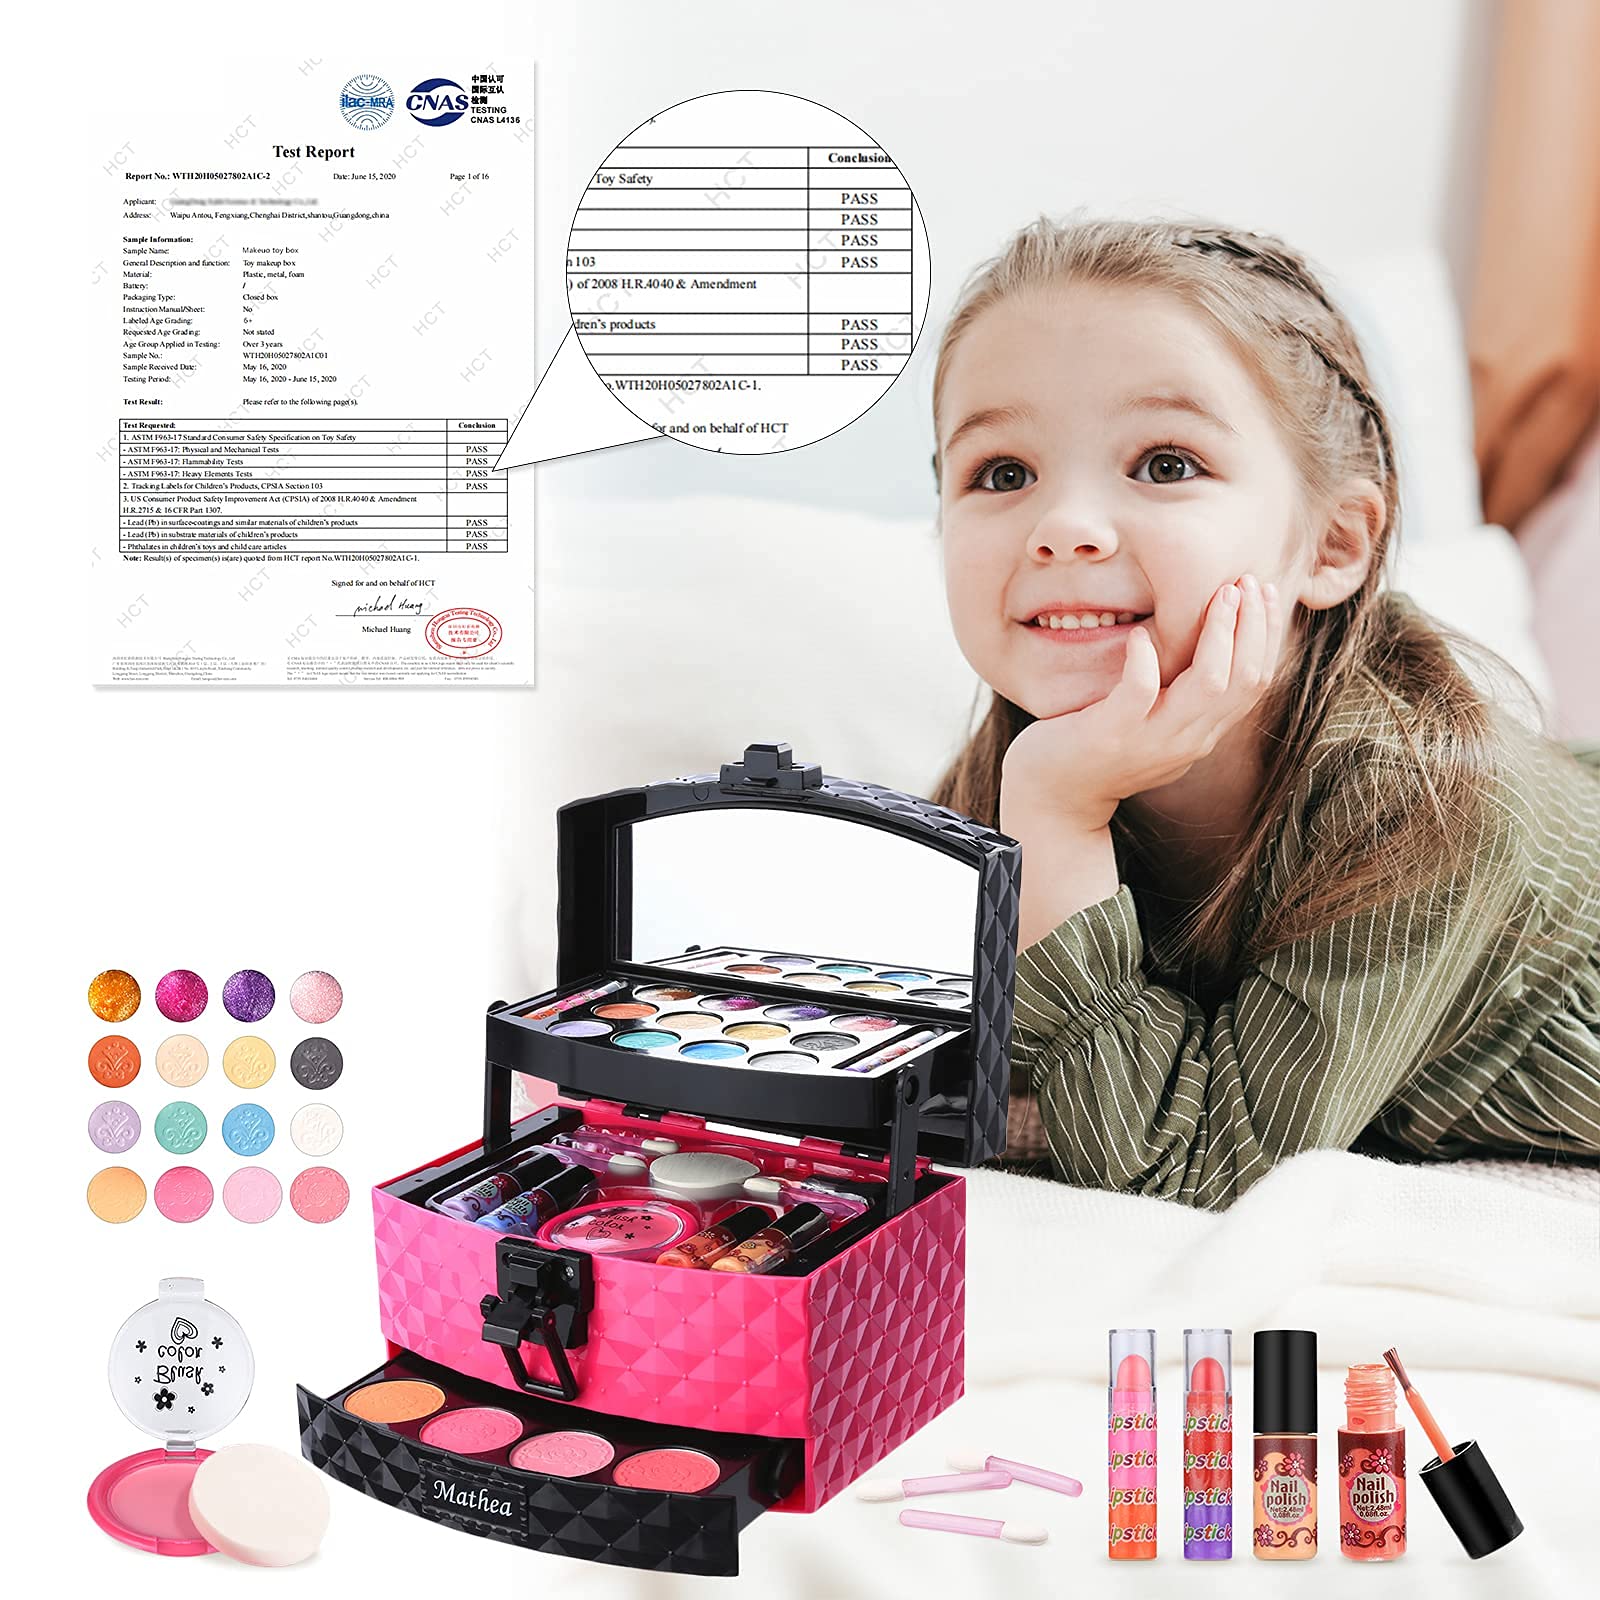 Mathea Kids Makeup Kit for Girls, Washable & Non-Toxic, Real Makeup Girl Toys, Makeup Set for Girls, Easy to Storage and Portable, Birthday Gift for Kids Age 3-12